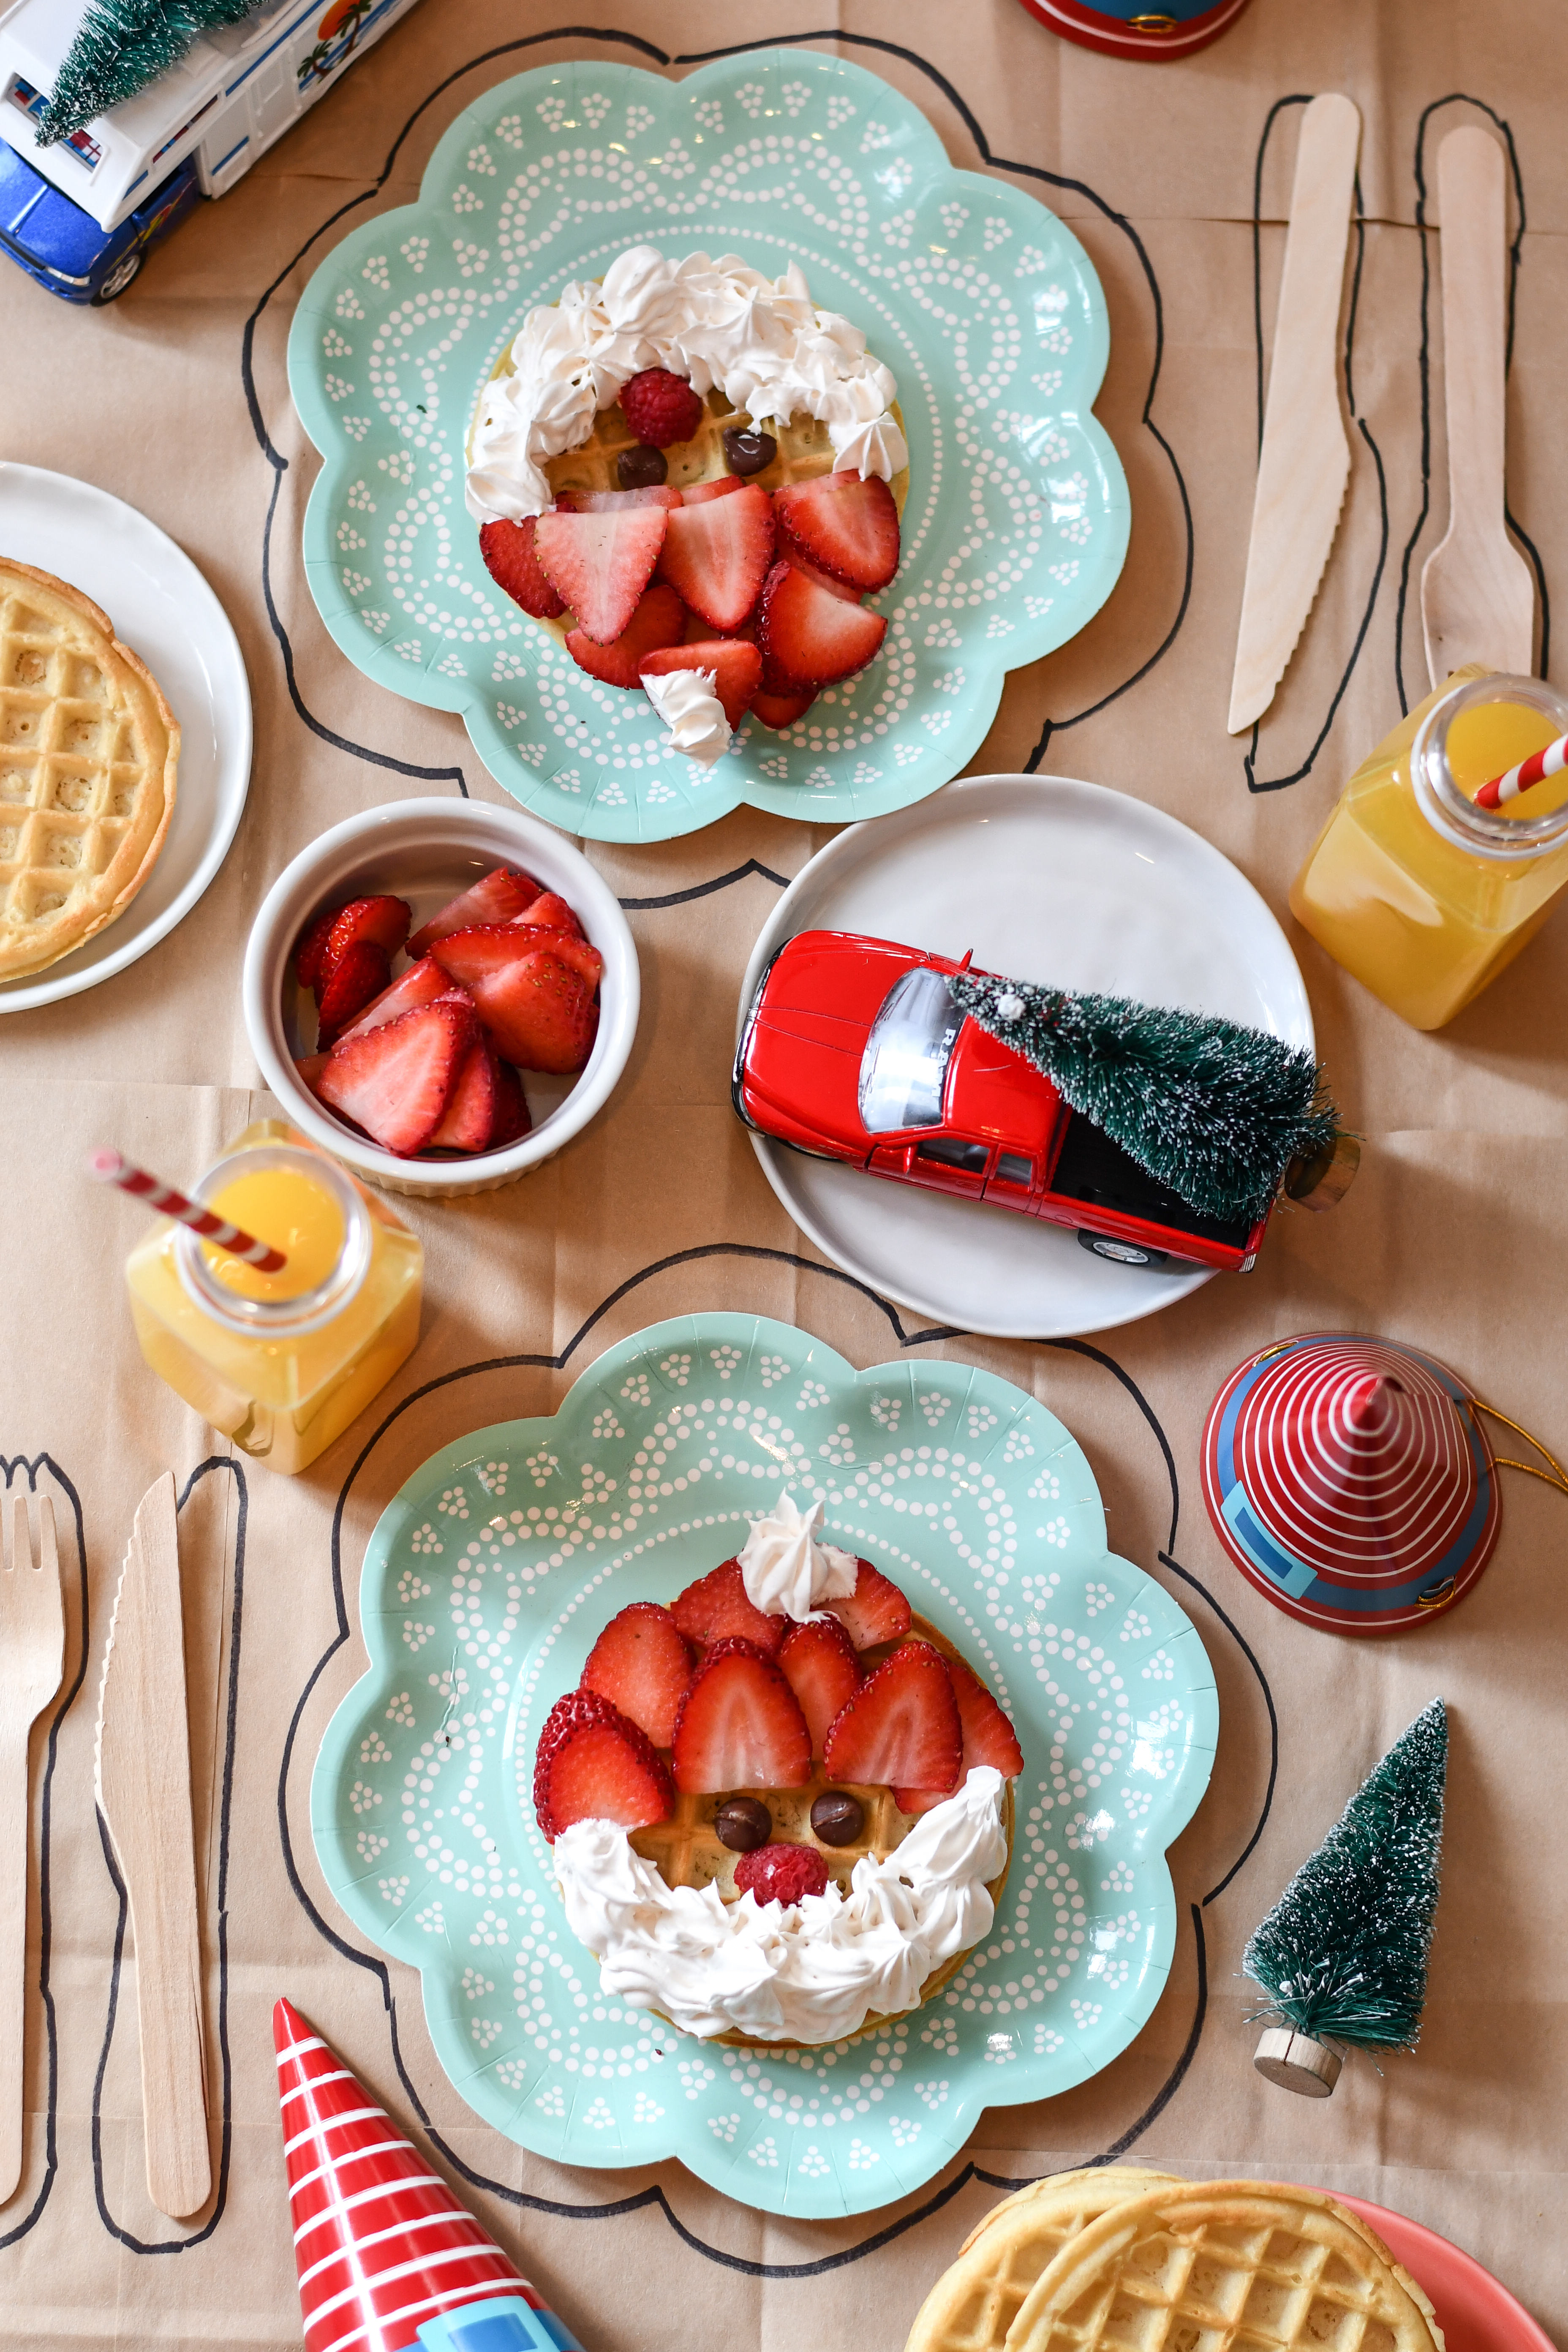 A table set with 2 plates and Christmas Breakfast Waffles made from frozen waffles, strawberries, and a whipped cream beard.